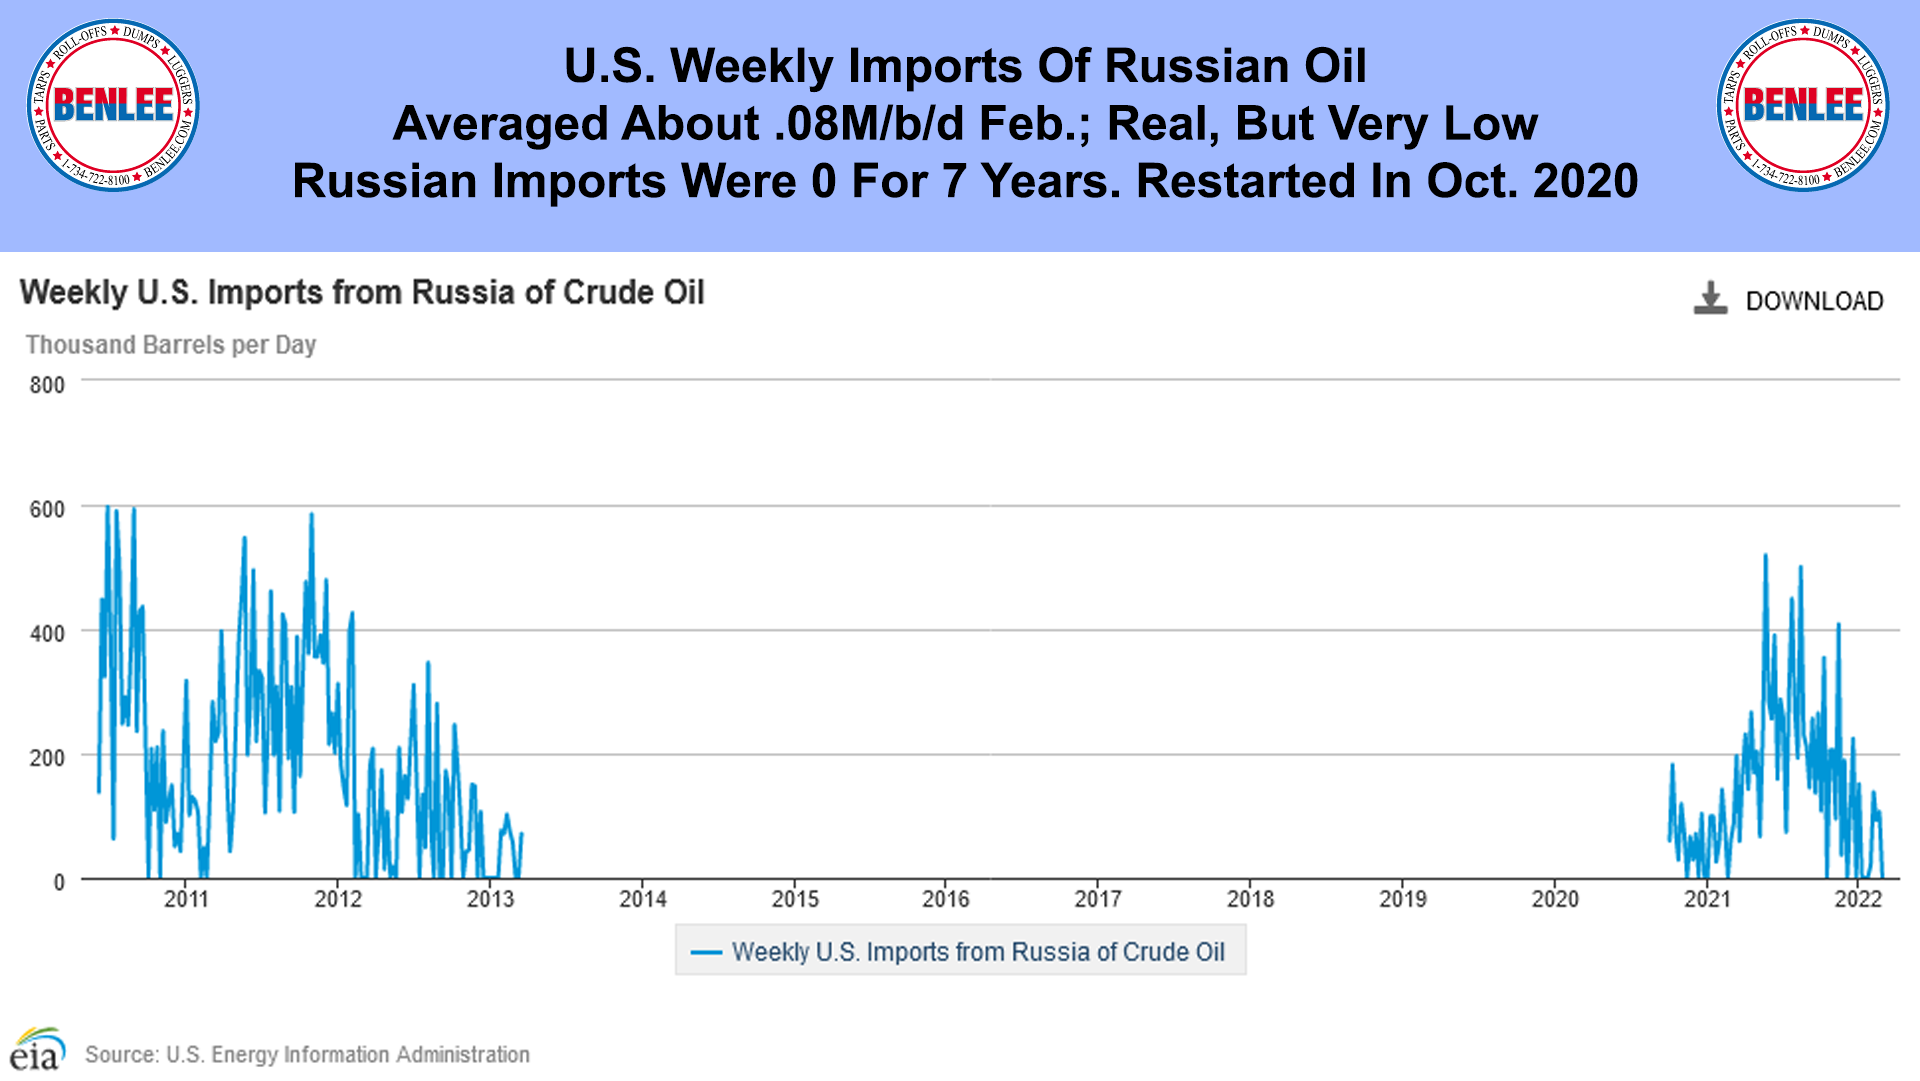 U.S. Weekly Imports Of Russian Oil